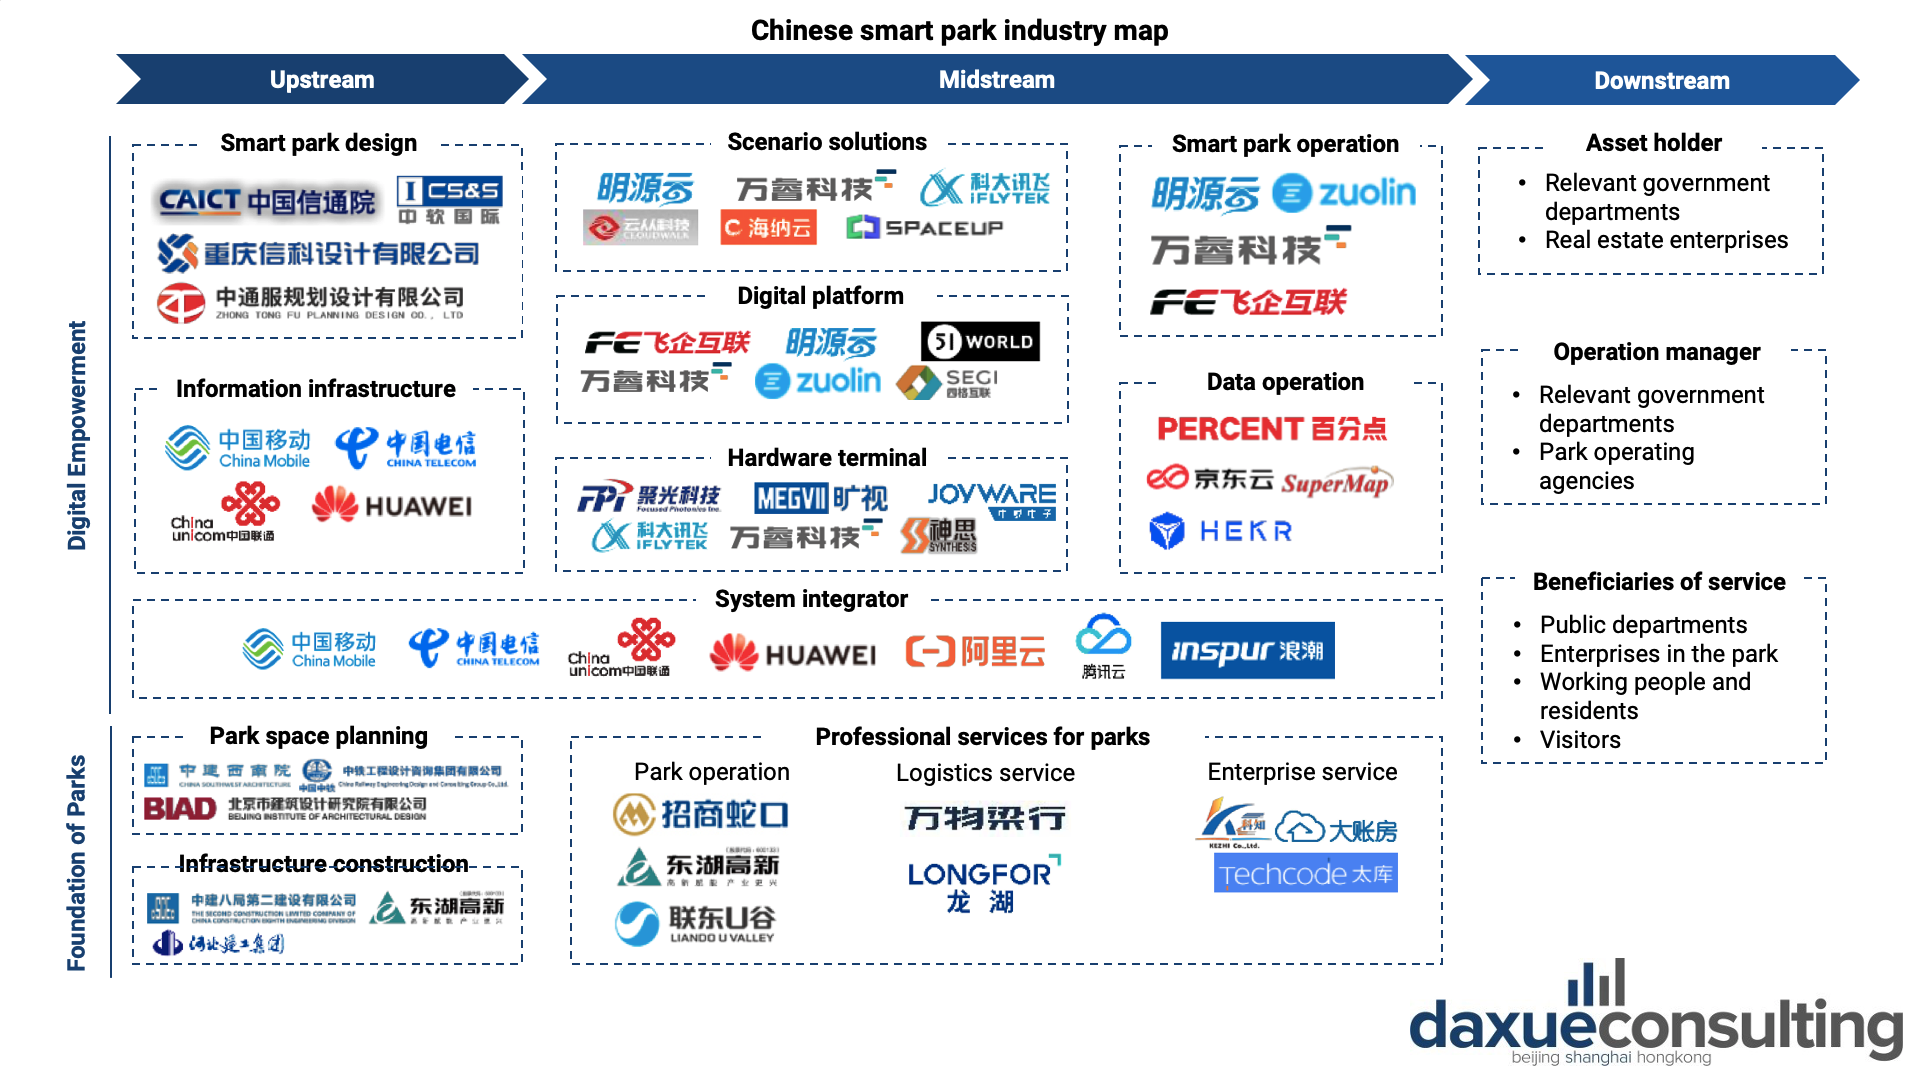 Chinese smart parks